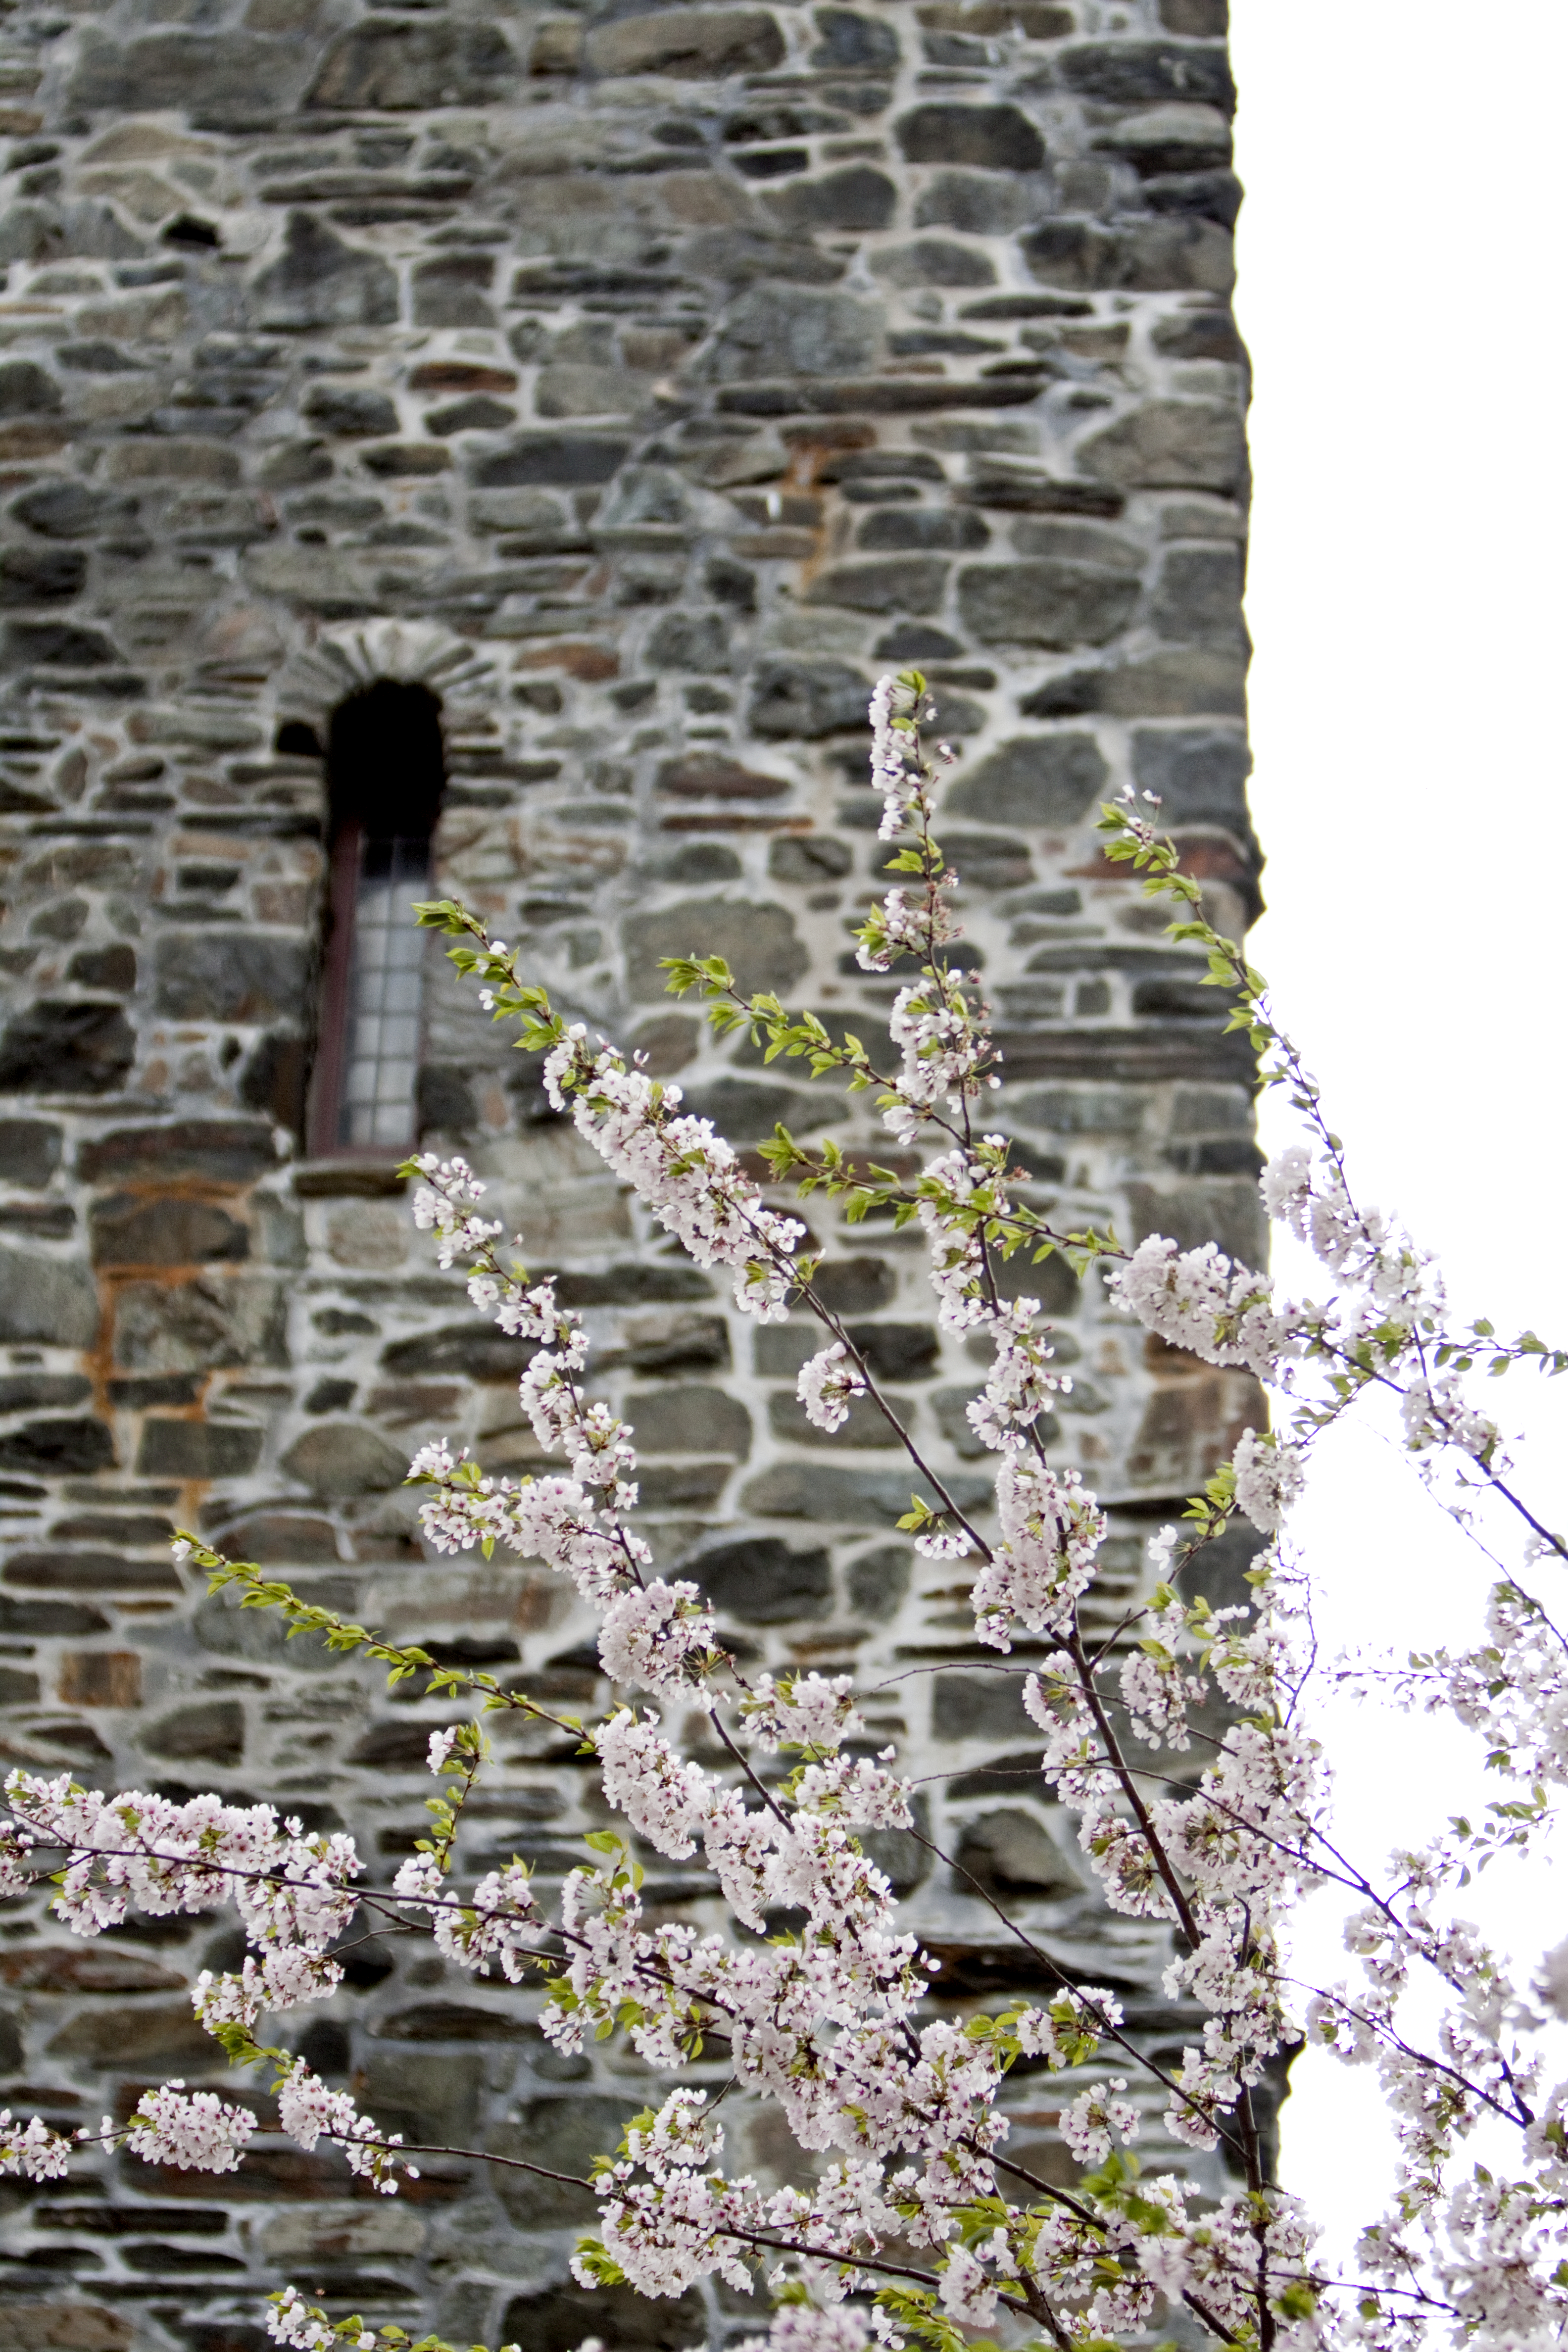 Gray stone tower in background, blooms on a tree branch in foreground